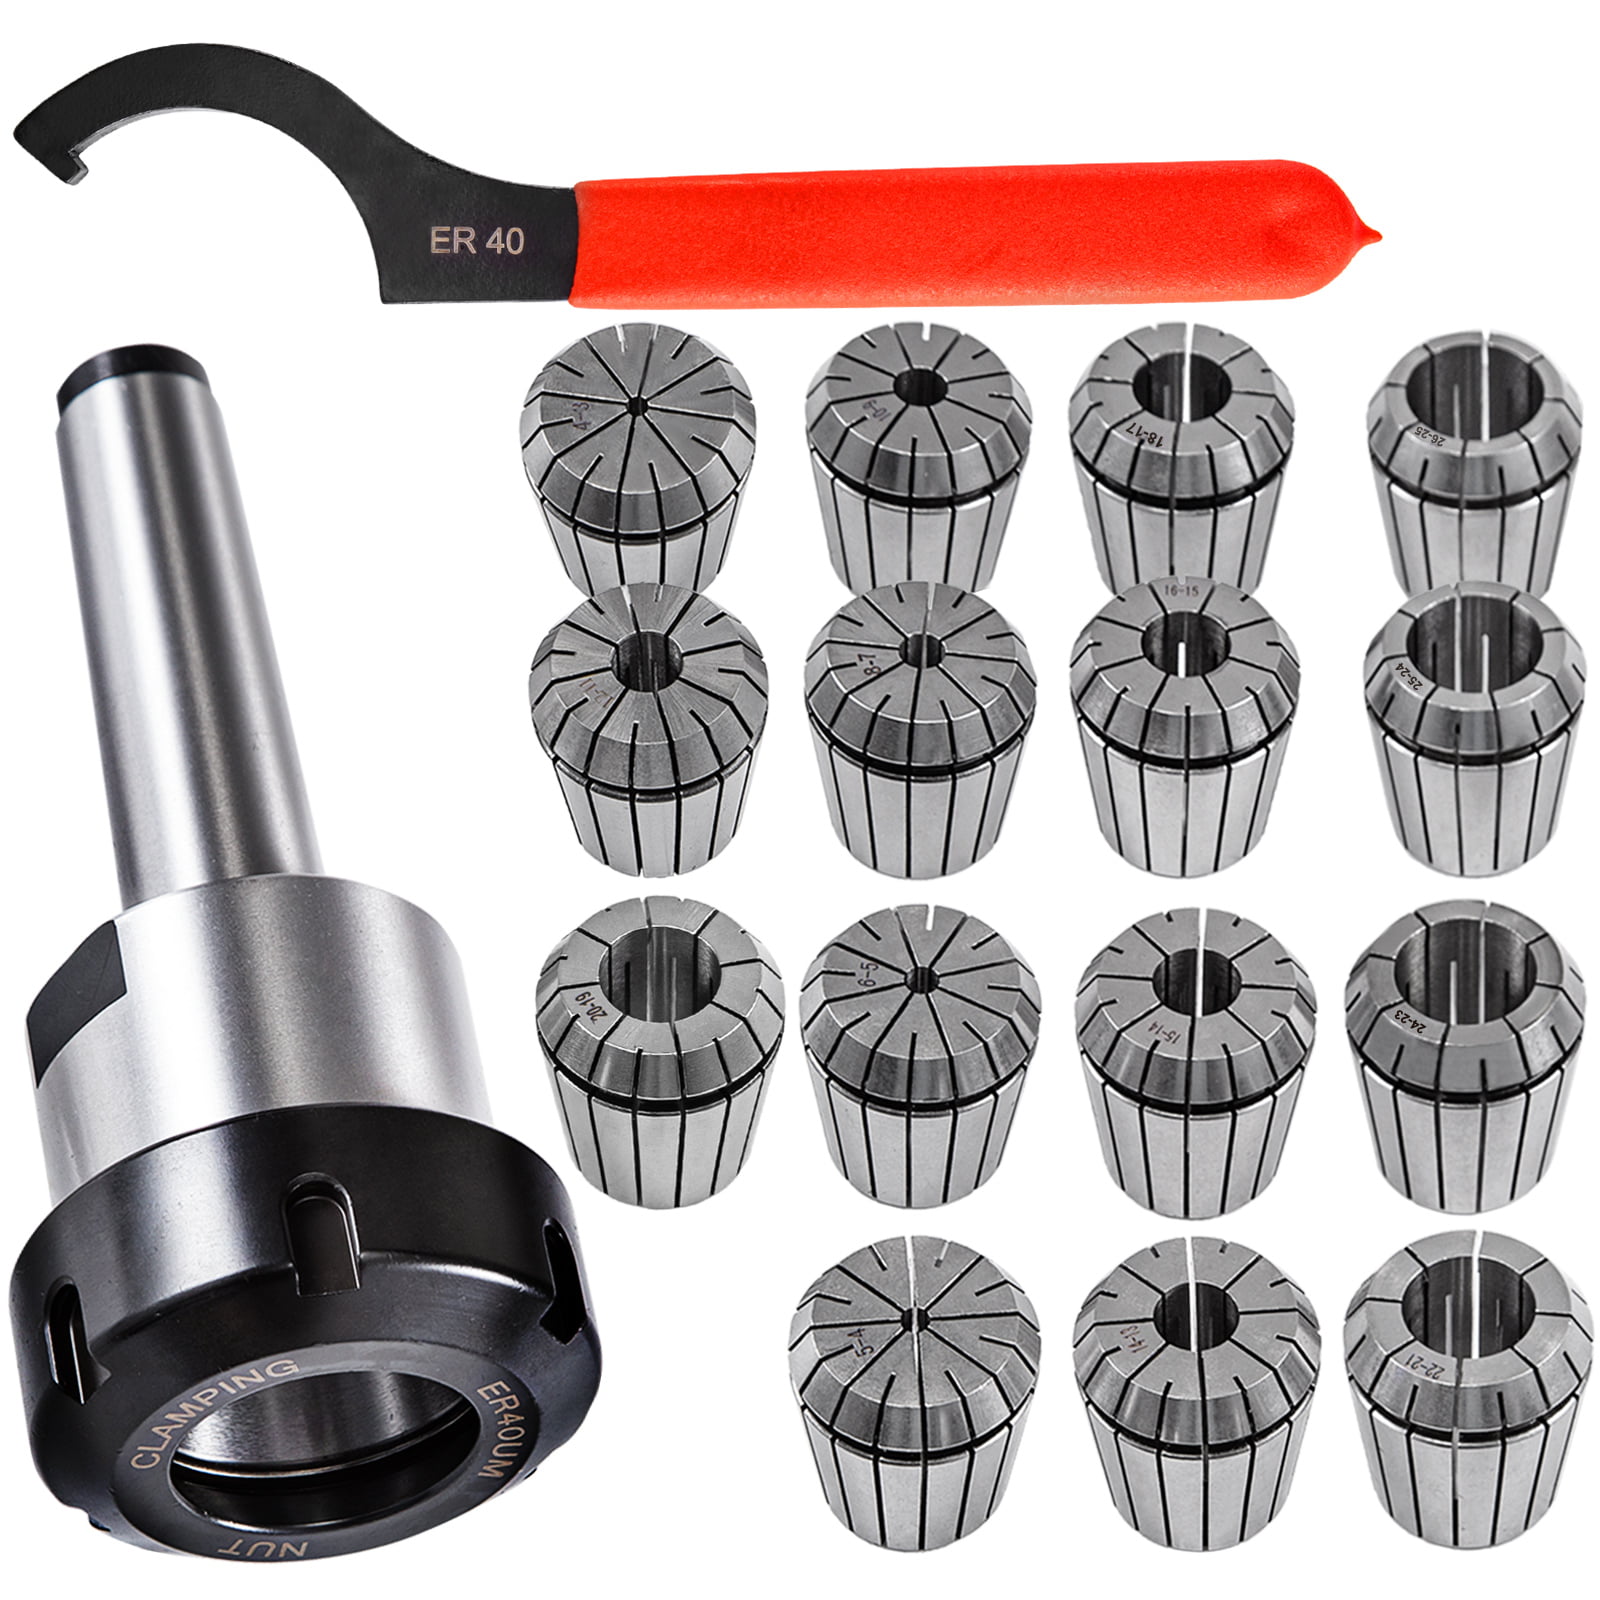 15 PCs MT3 Shank ER32 Chuck with Collets 1/8"-3/4" Set with Box for CNC Milling 